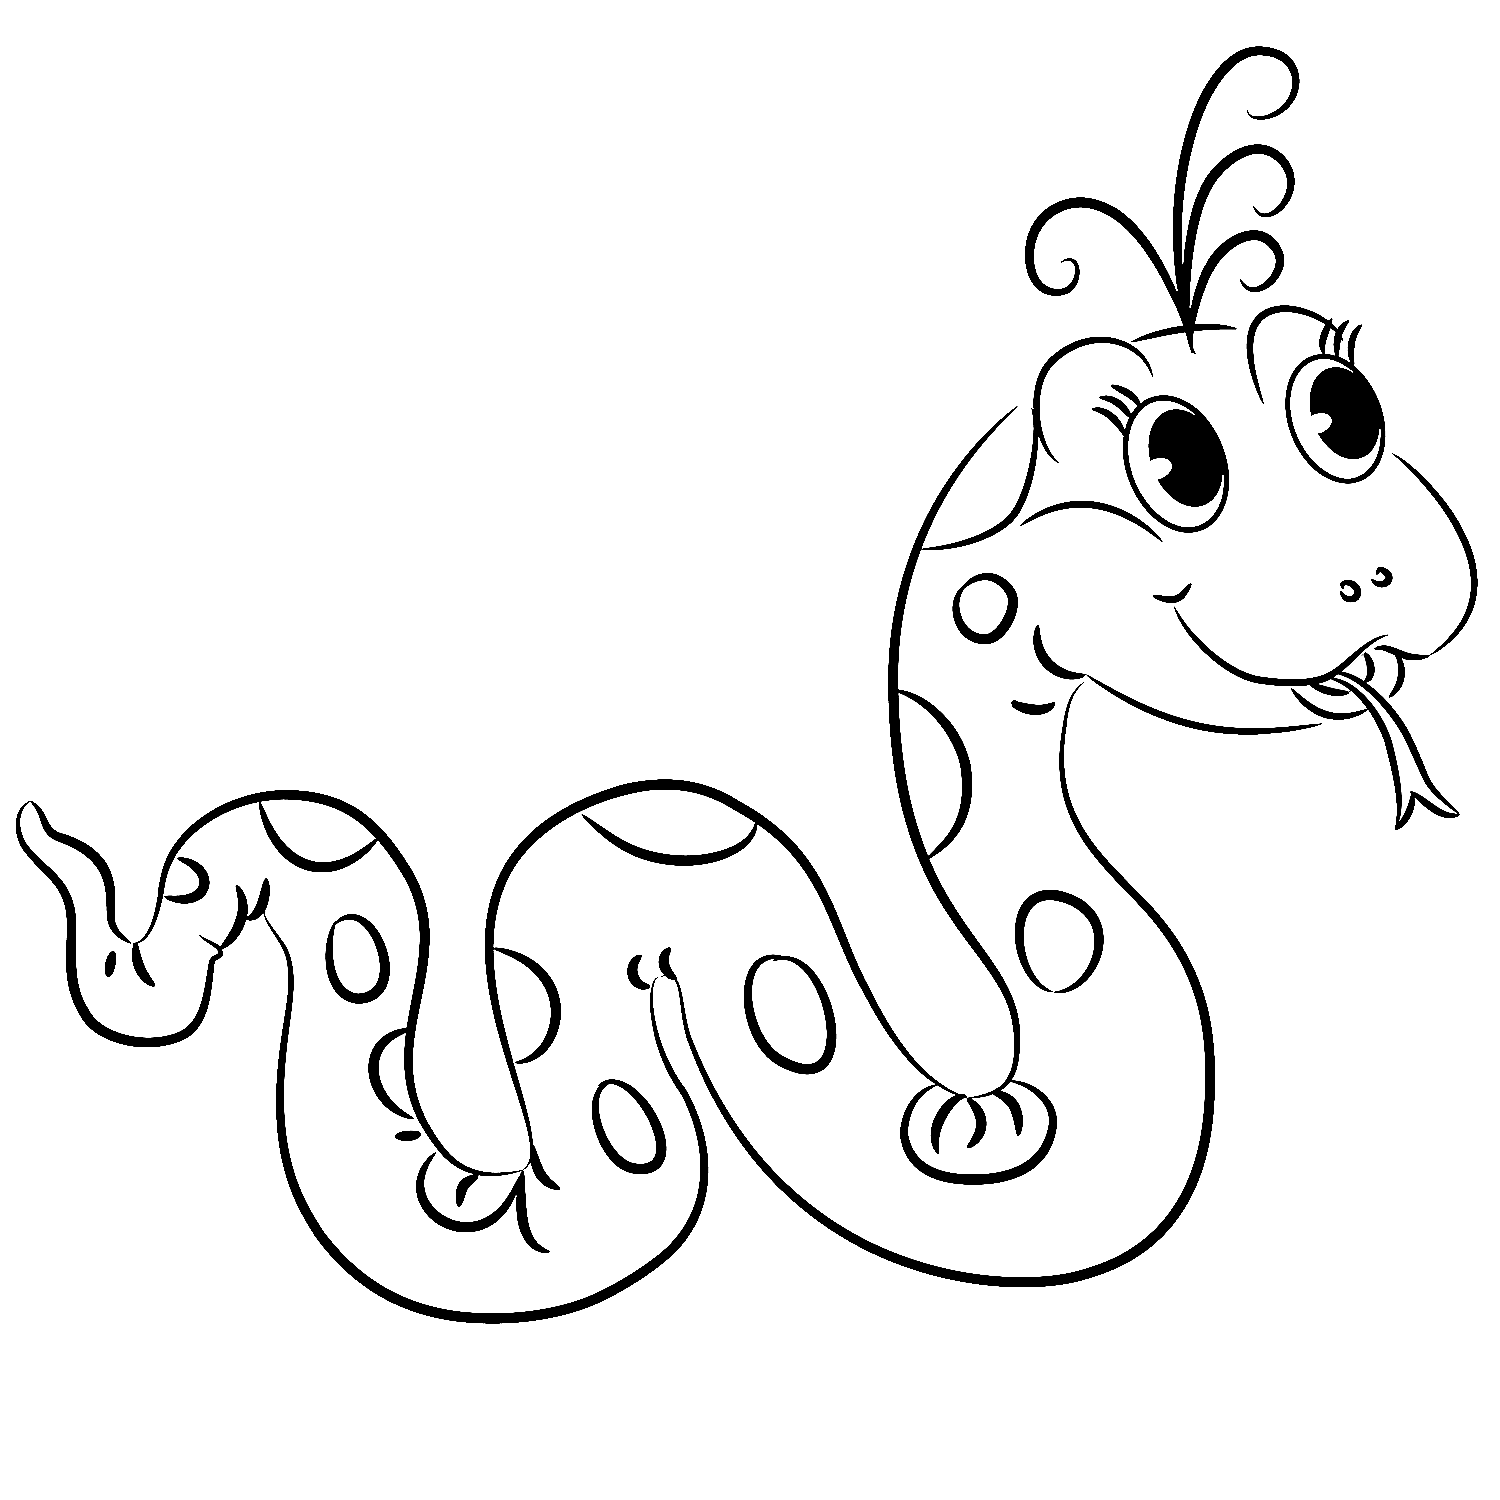 snake colouring picture free printable snake coloring pages for kids picture snake colouring 